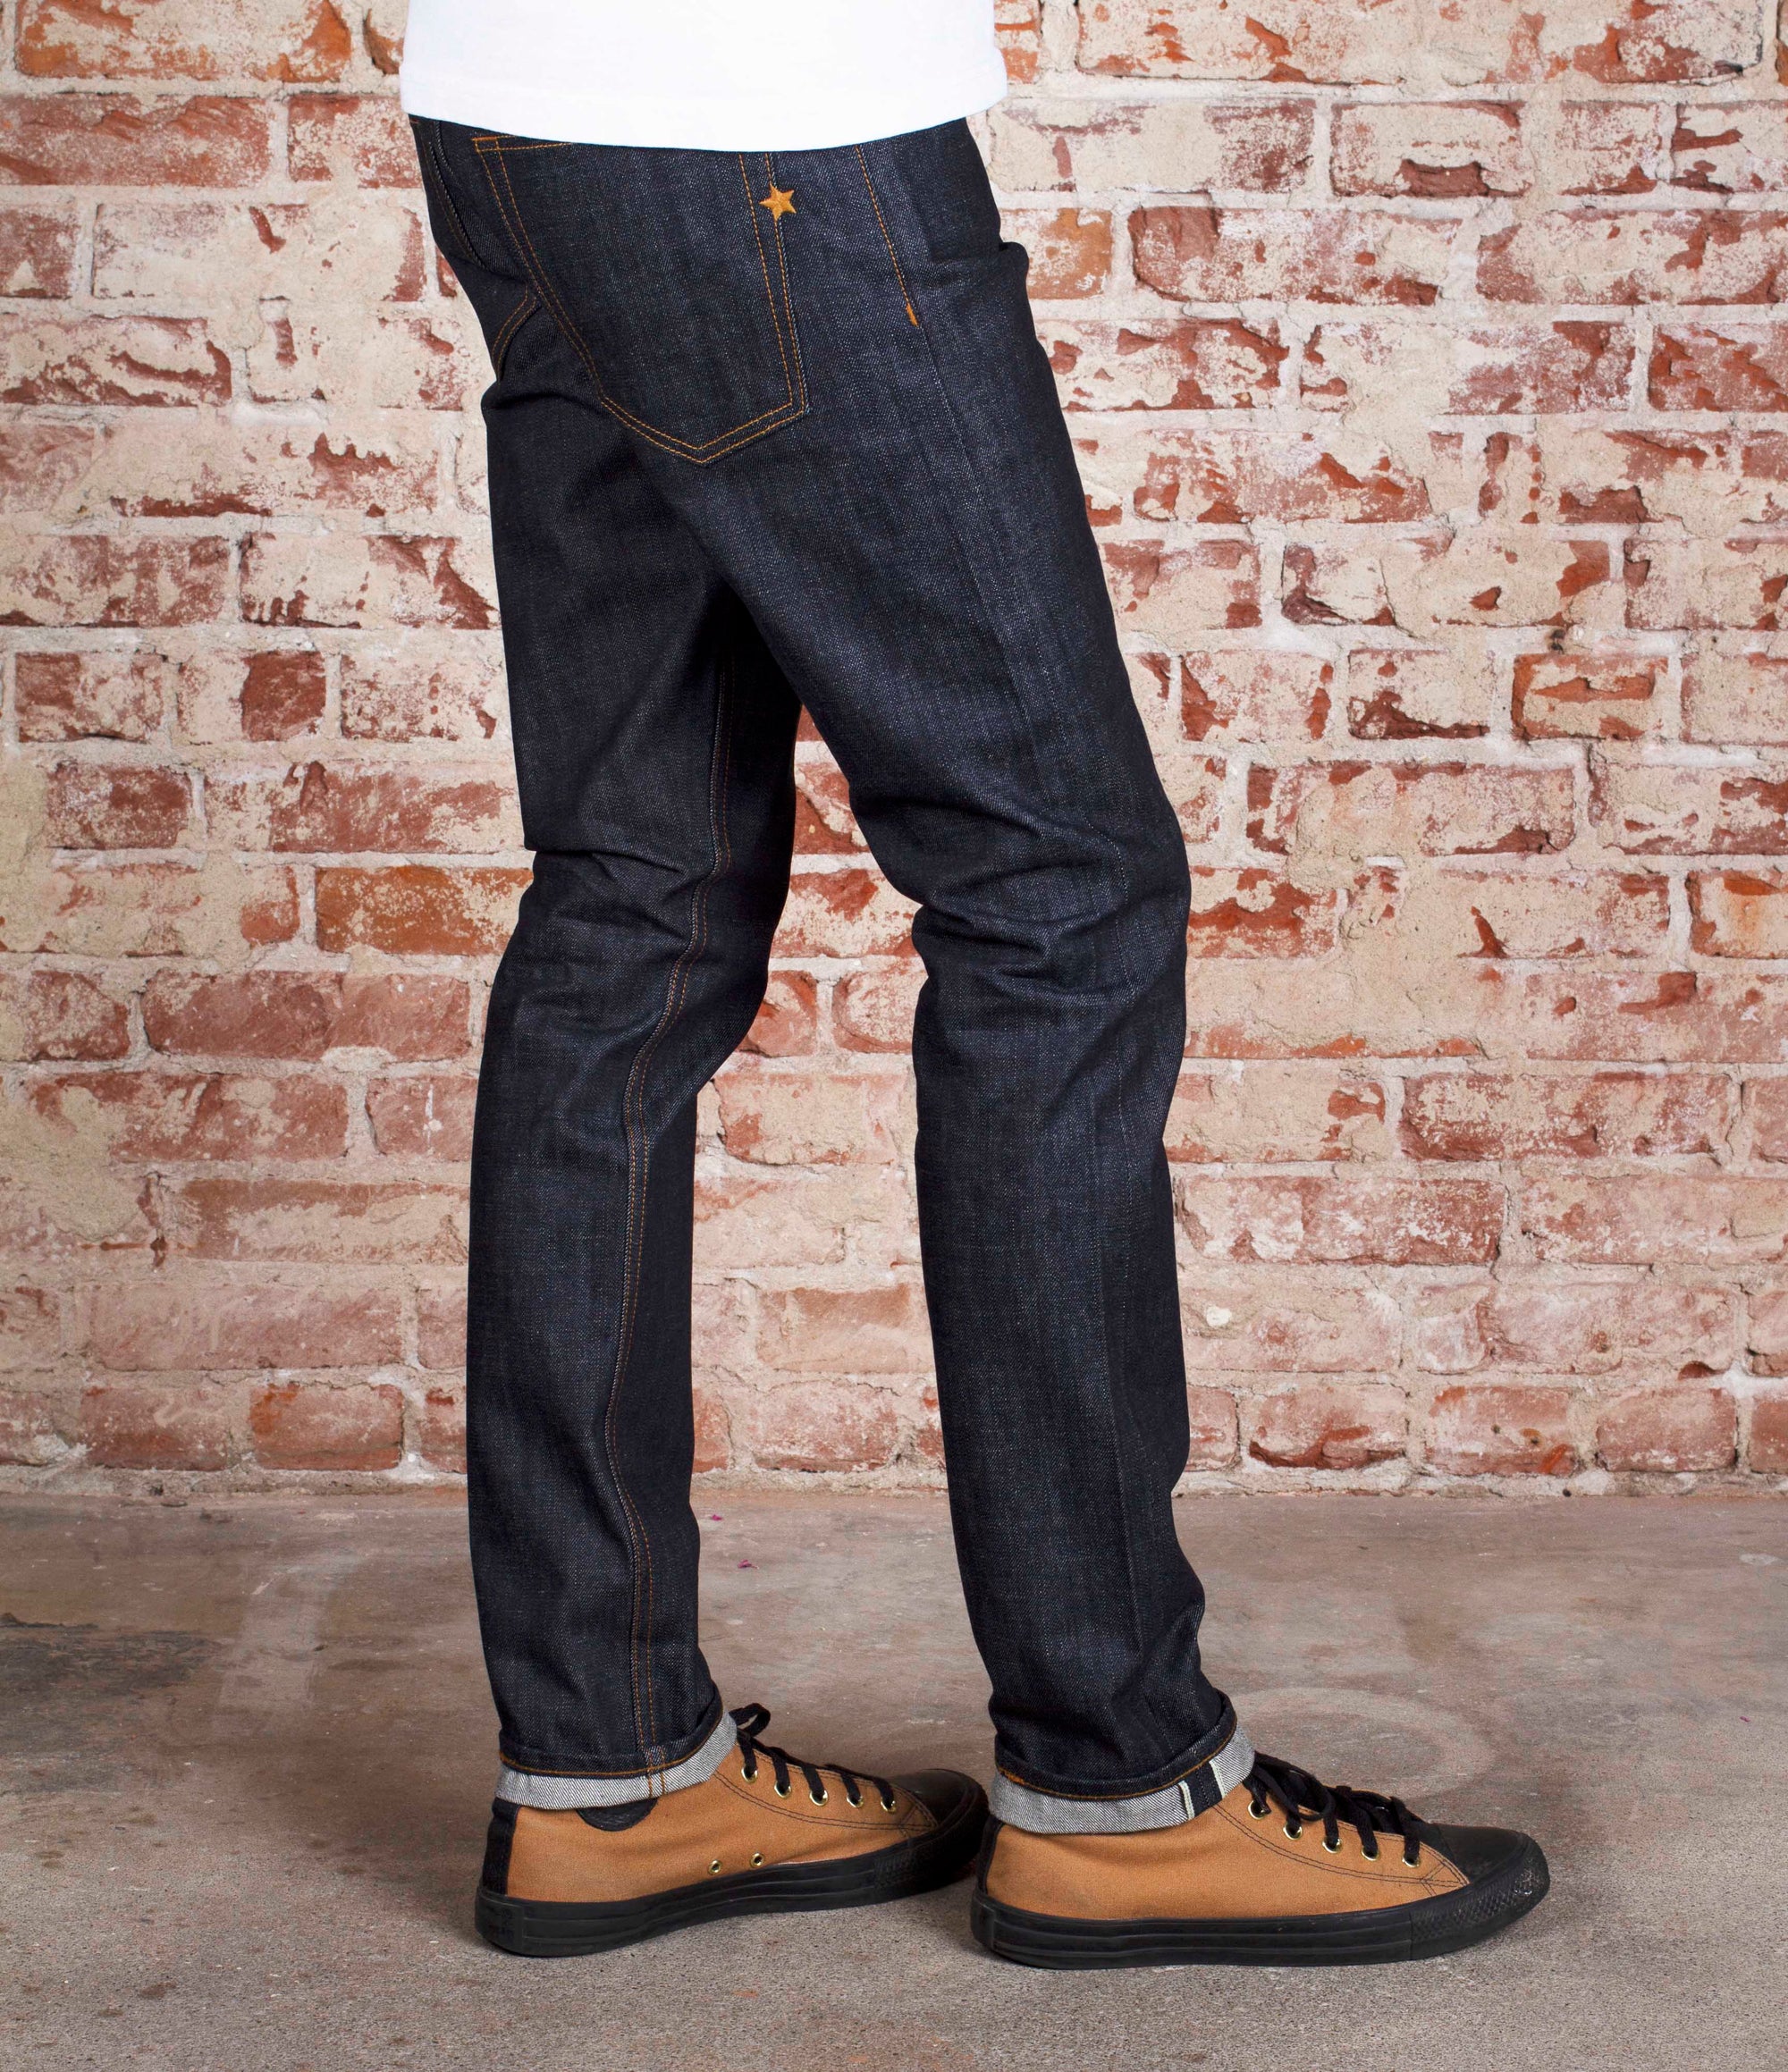 Brave Star Selvage Brave Star Selvage Cone Mills Jeans